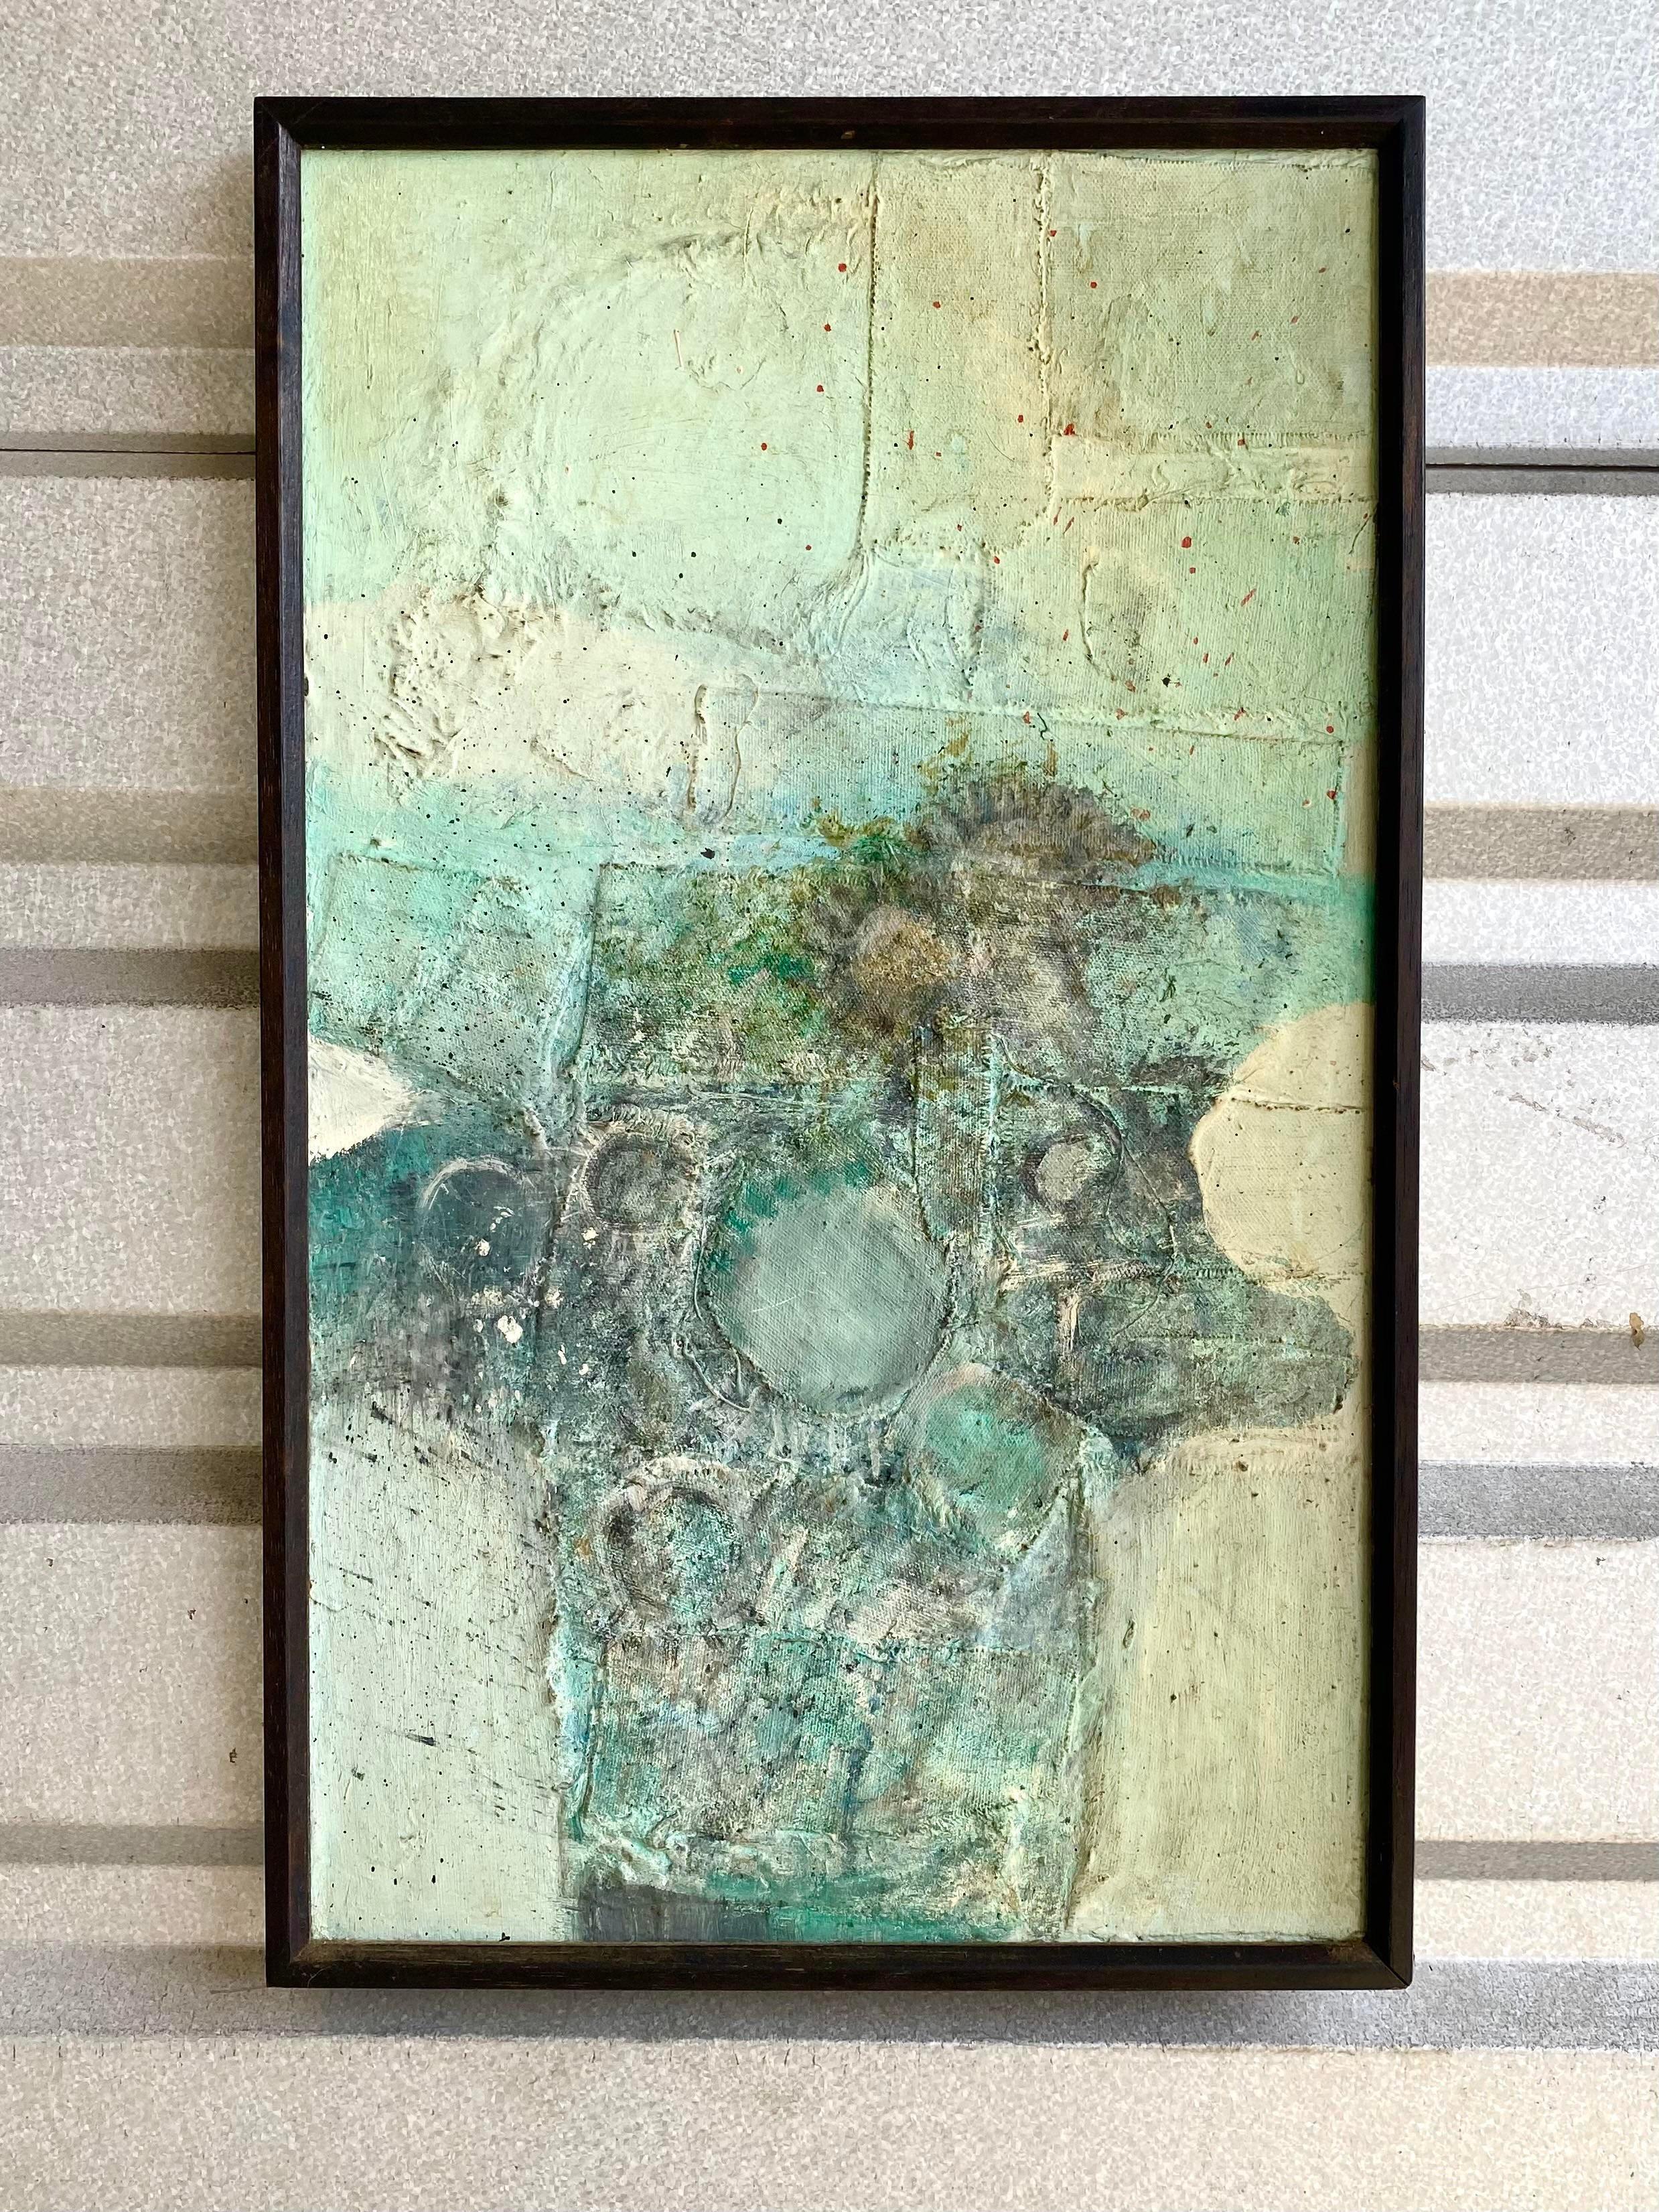 Amazing Midcentury mixed media oil painting. Signed by the artist Joseph Davoli. A brilliant composition in the most beautiful colors. Acquired from his Miami estate